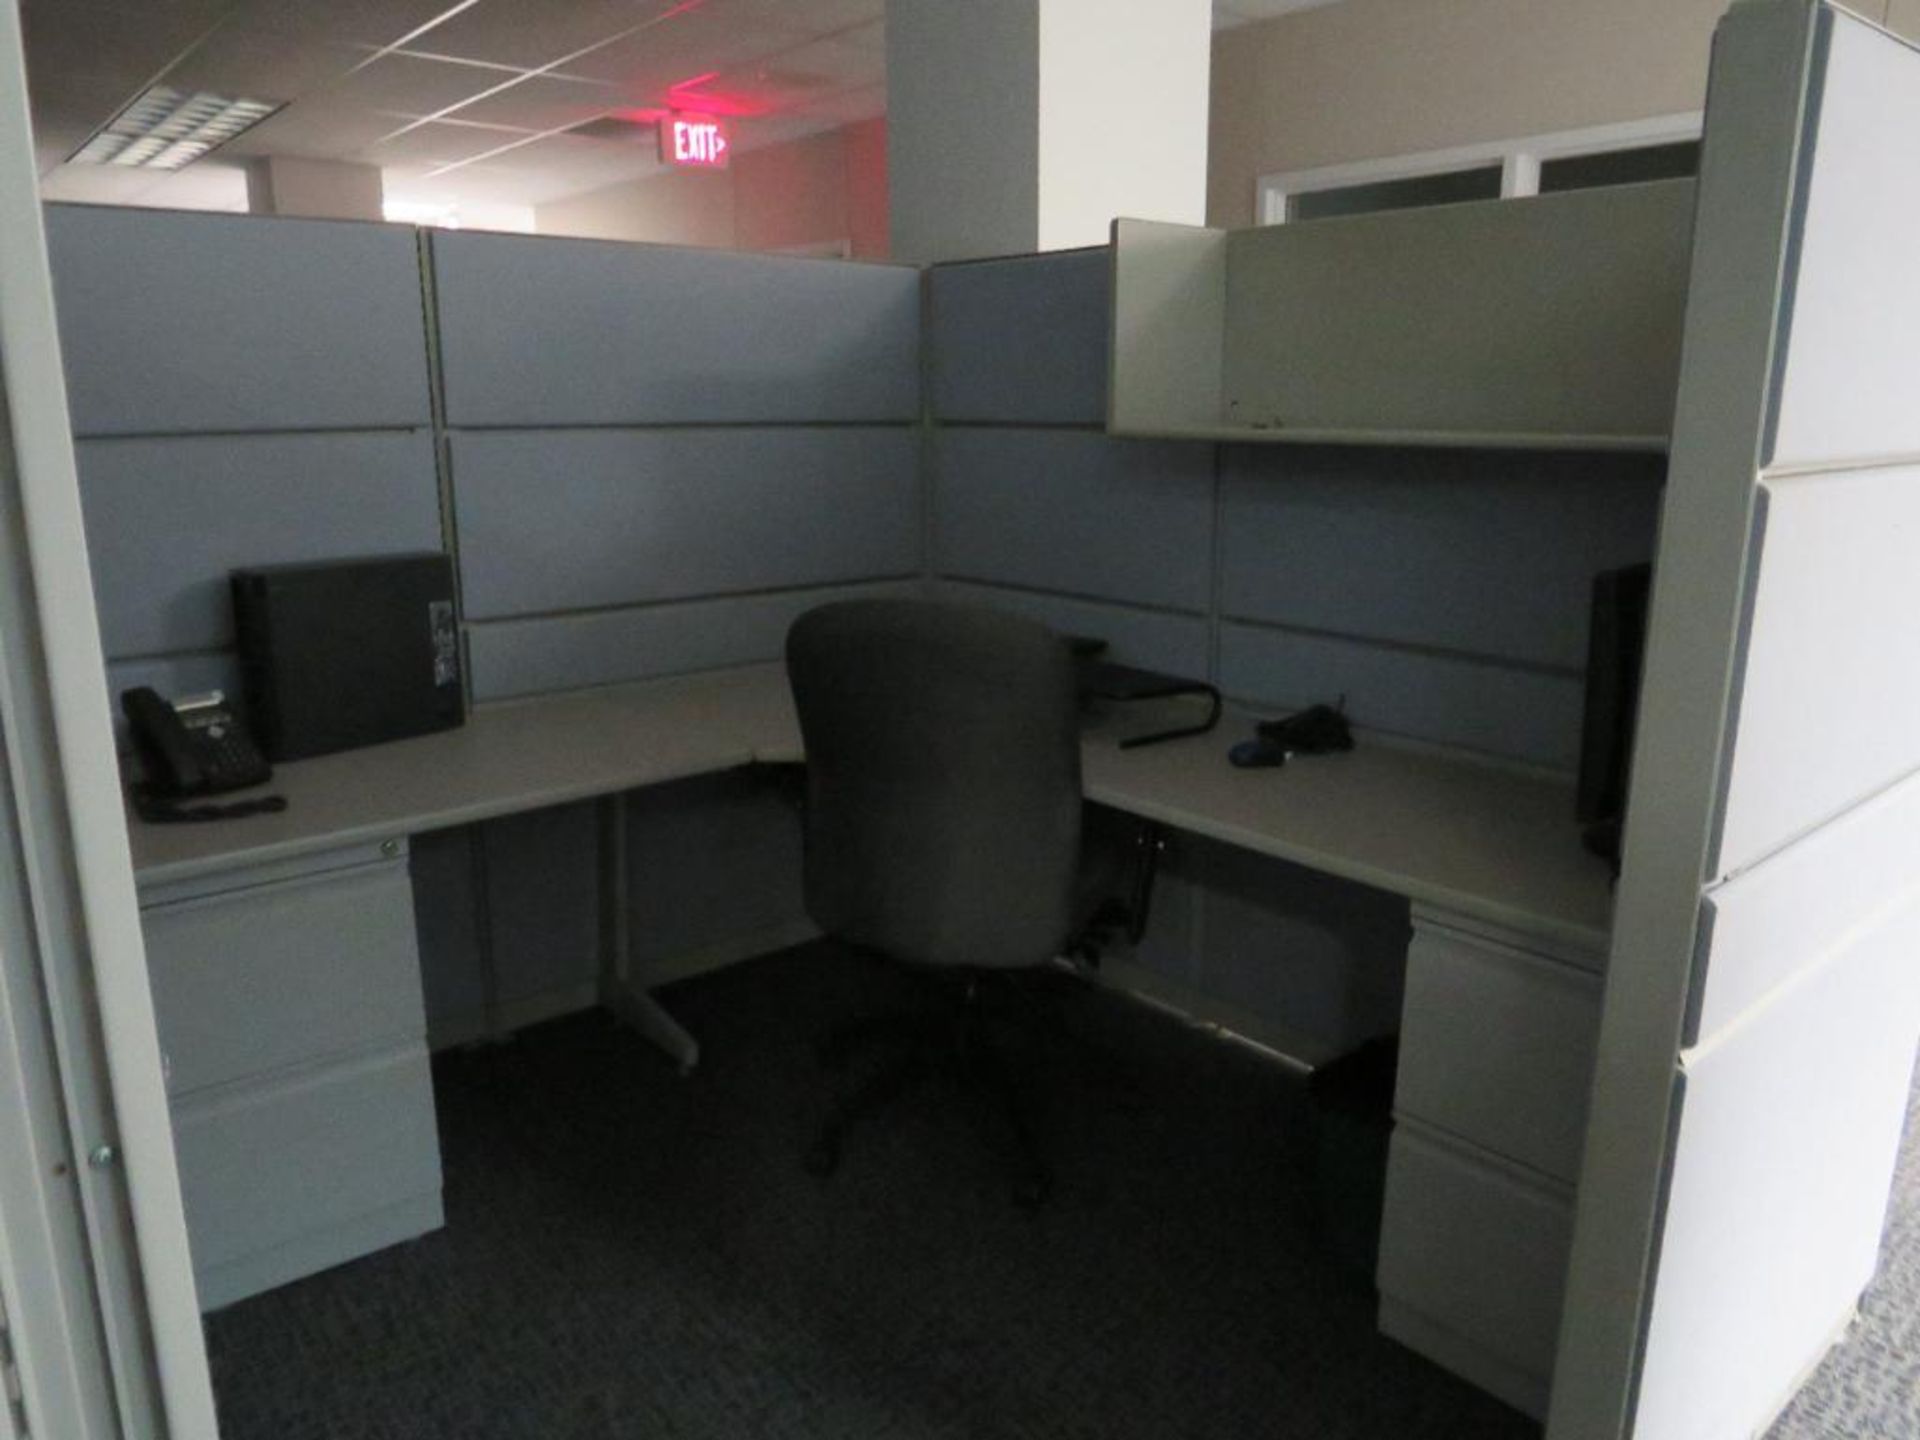 Lot c/o: Large Quantity of Cubicle Partitions w/ Hanging Work Table, on 2nd Floor Approx. 7,100 Sq. - Image 2 of 8